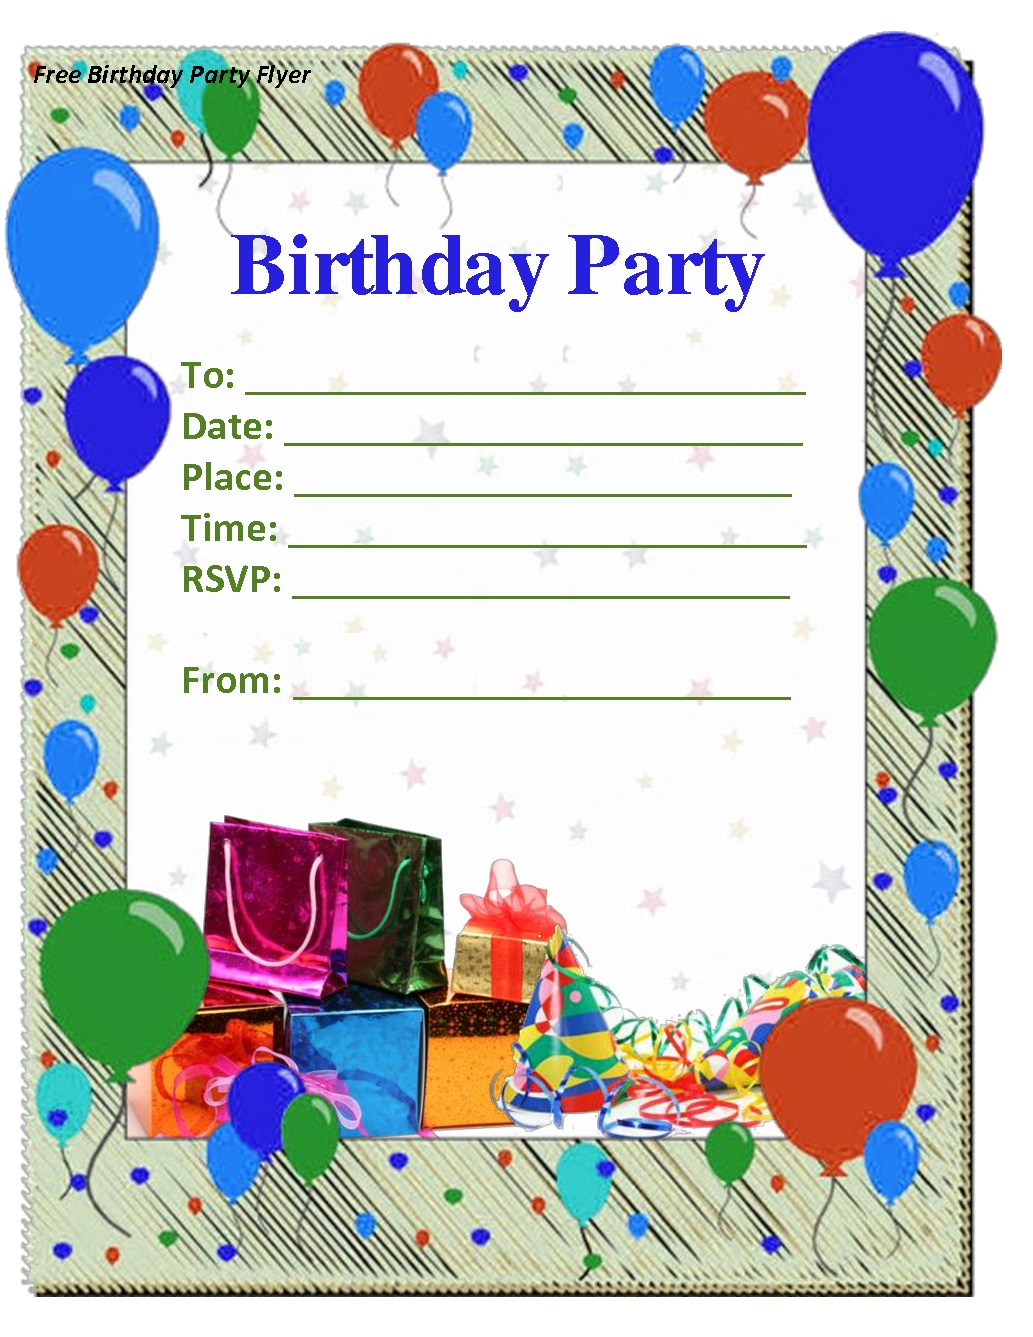 018 Birthday Party Invitations Template Ideas Th Invitation with sizing 1033 X 1337